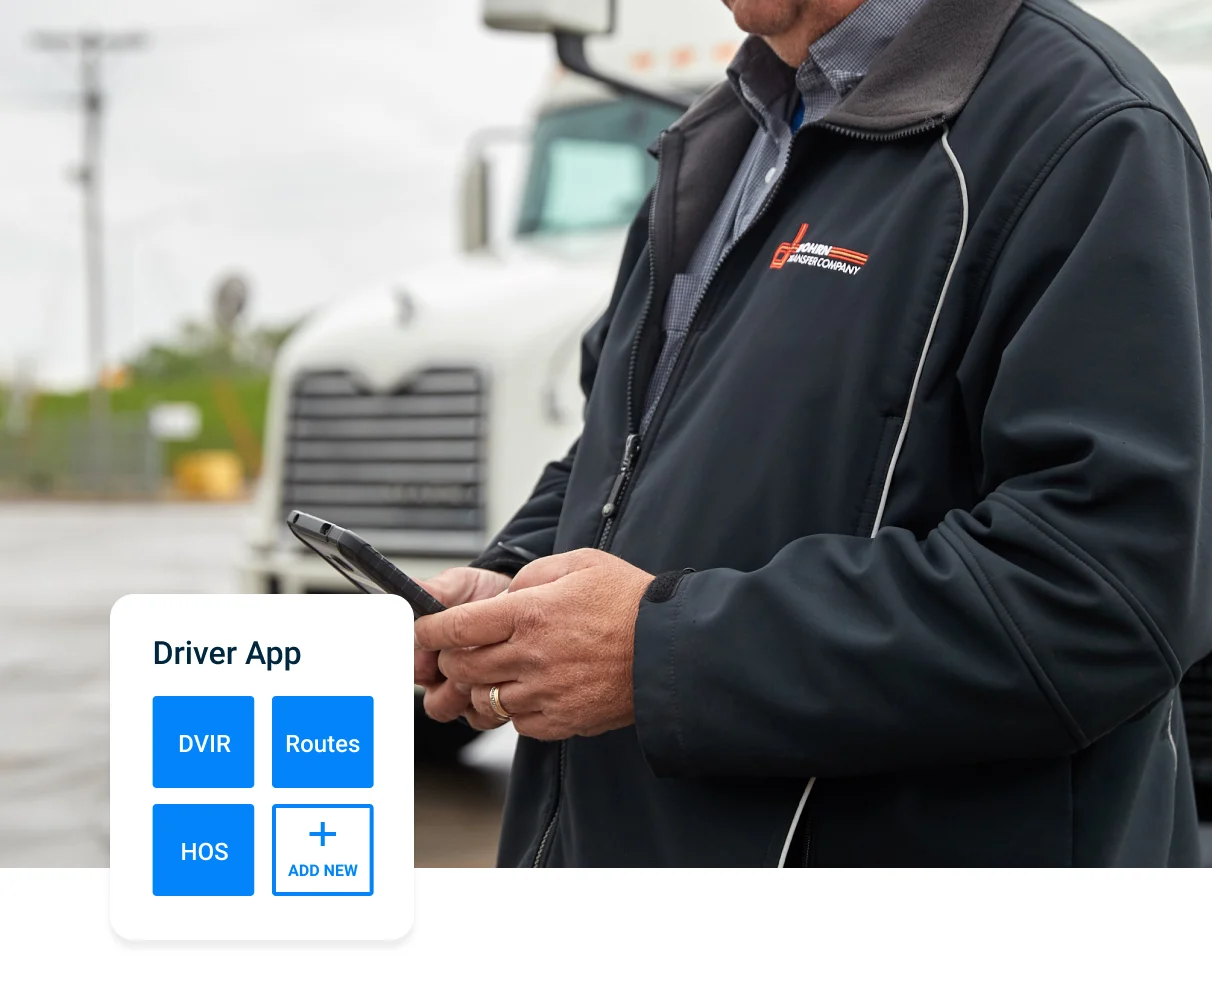 Attract and retain drivers with a modern experience